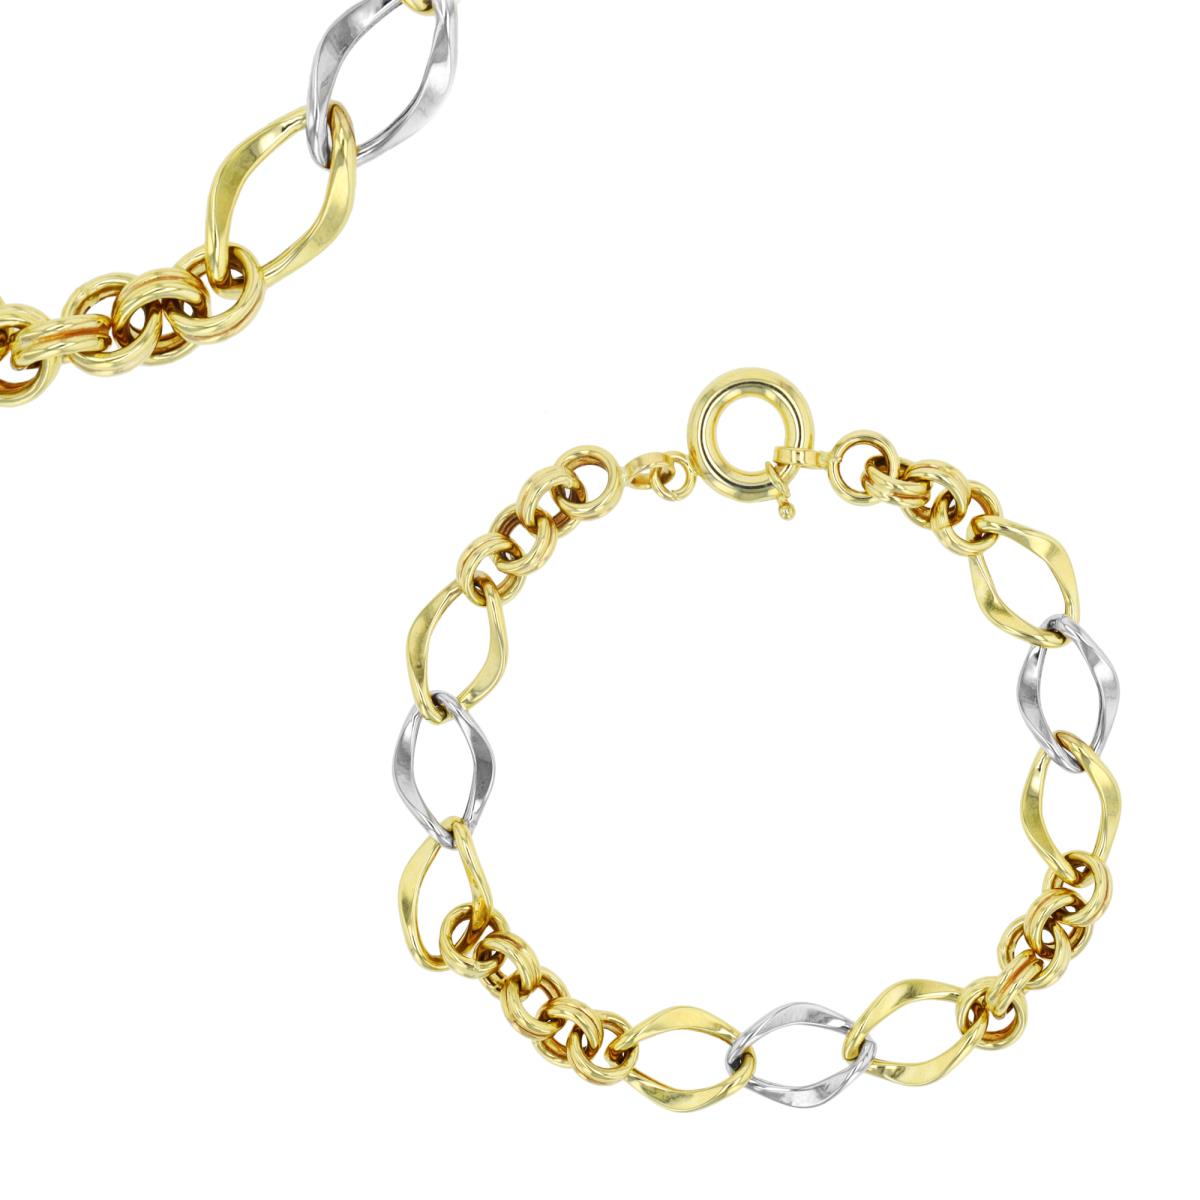 10K Two-Tone Gold Hollow Oval & Double Round Link 7.25" Bracelet